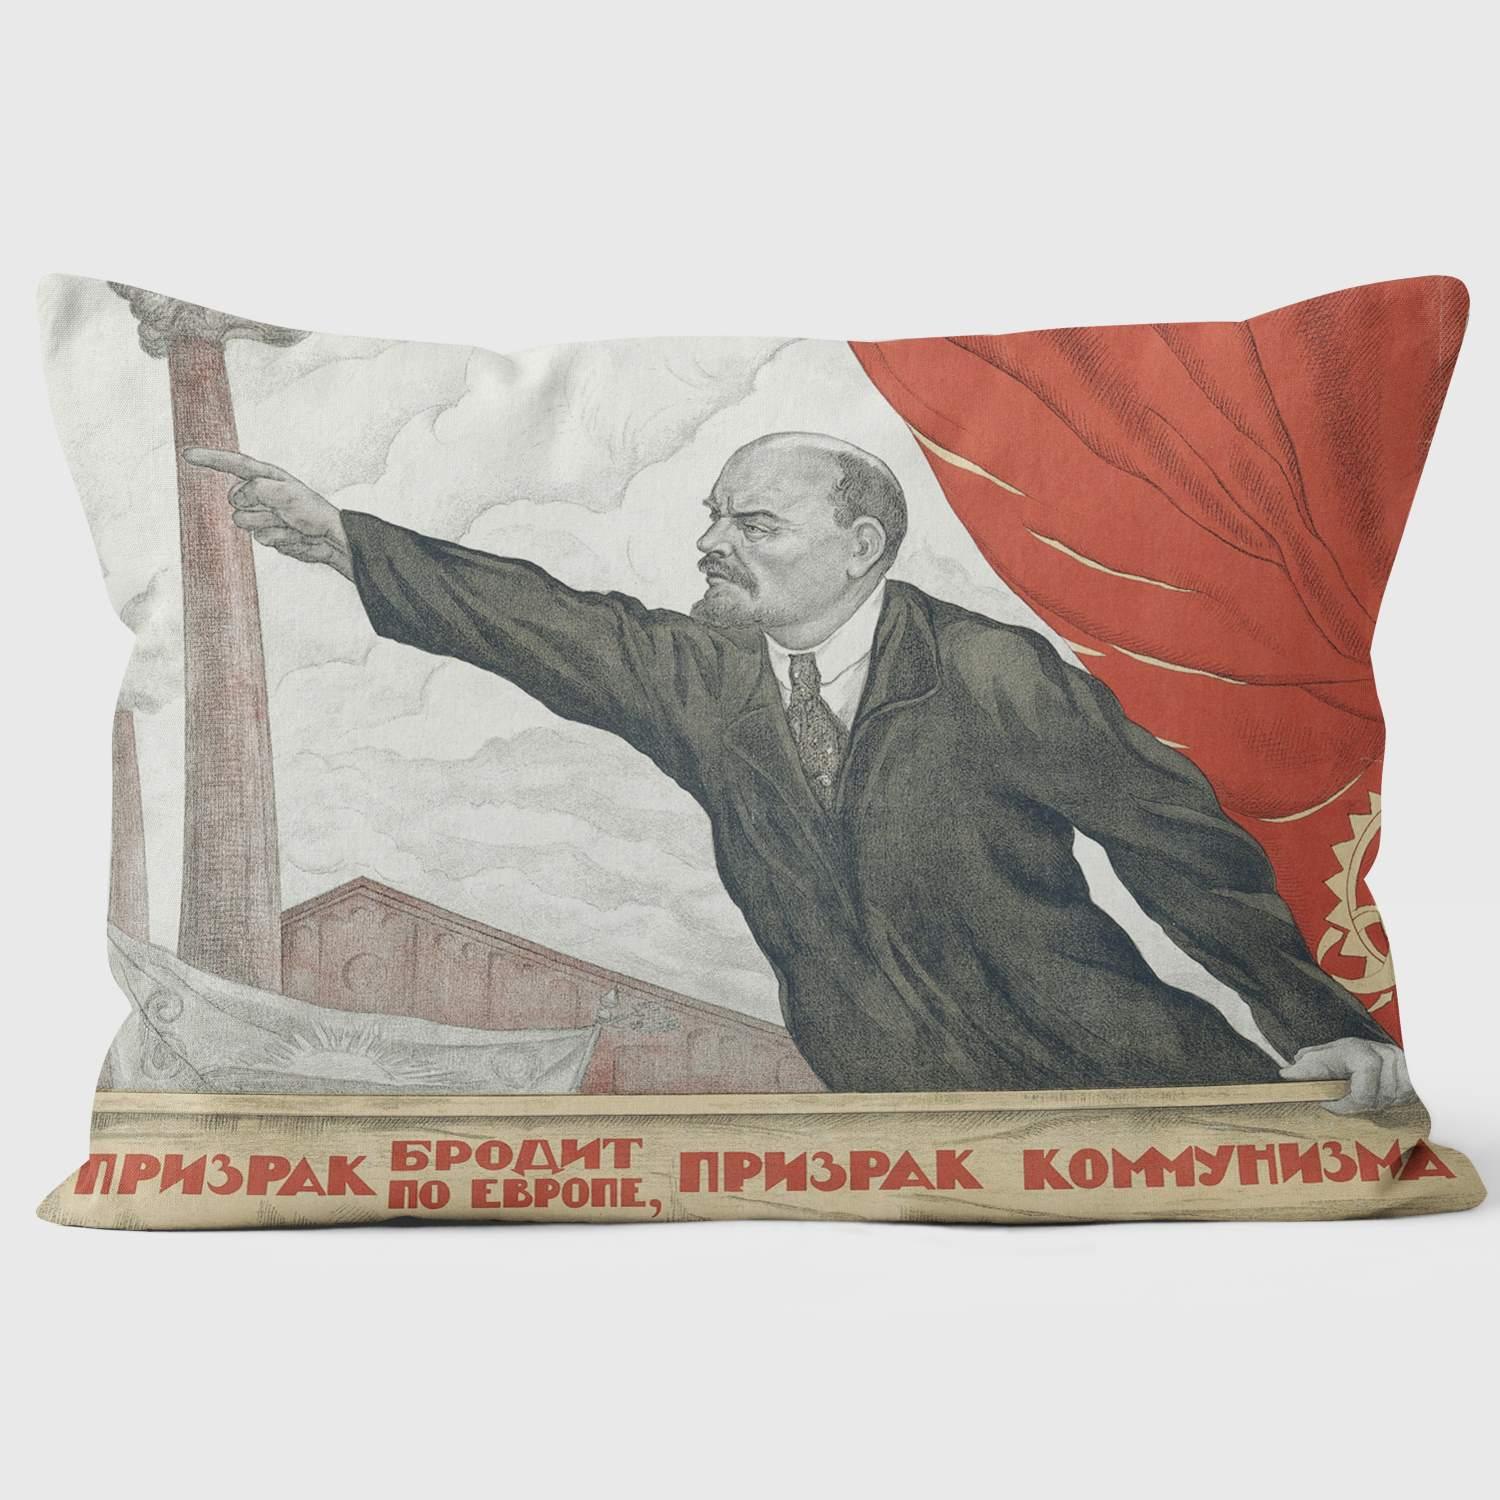 A Spectre is Haunting Europe, The Spectre of Communism - Tate - The Russian Revolution Cushion - Handmade Cushions UK - WeLoveCushions